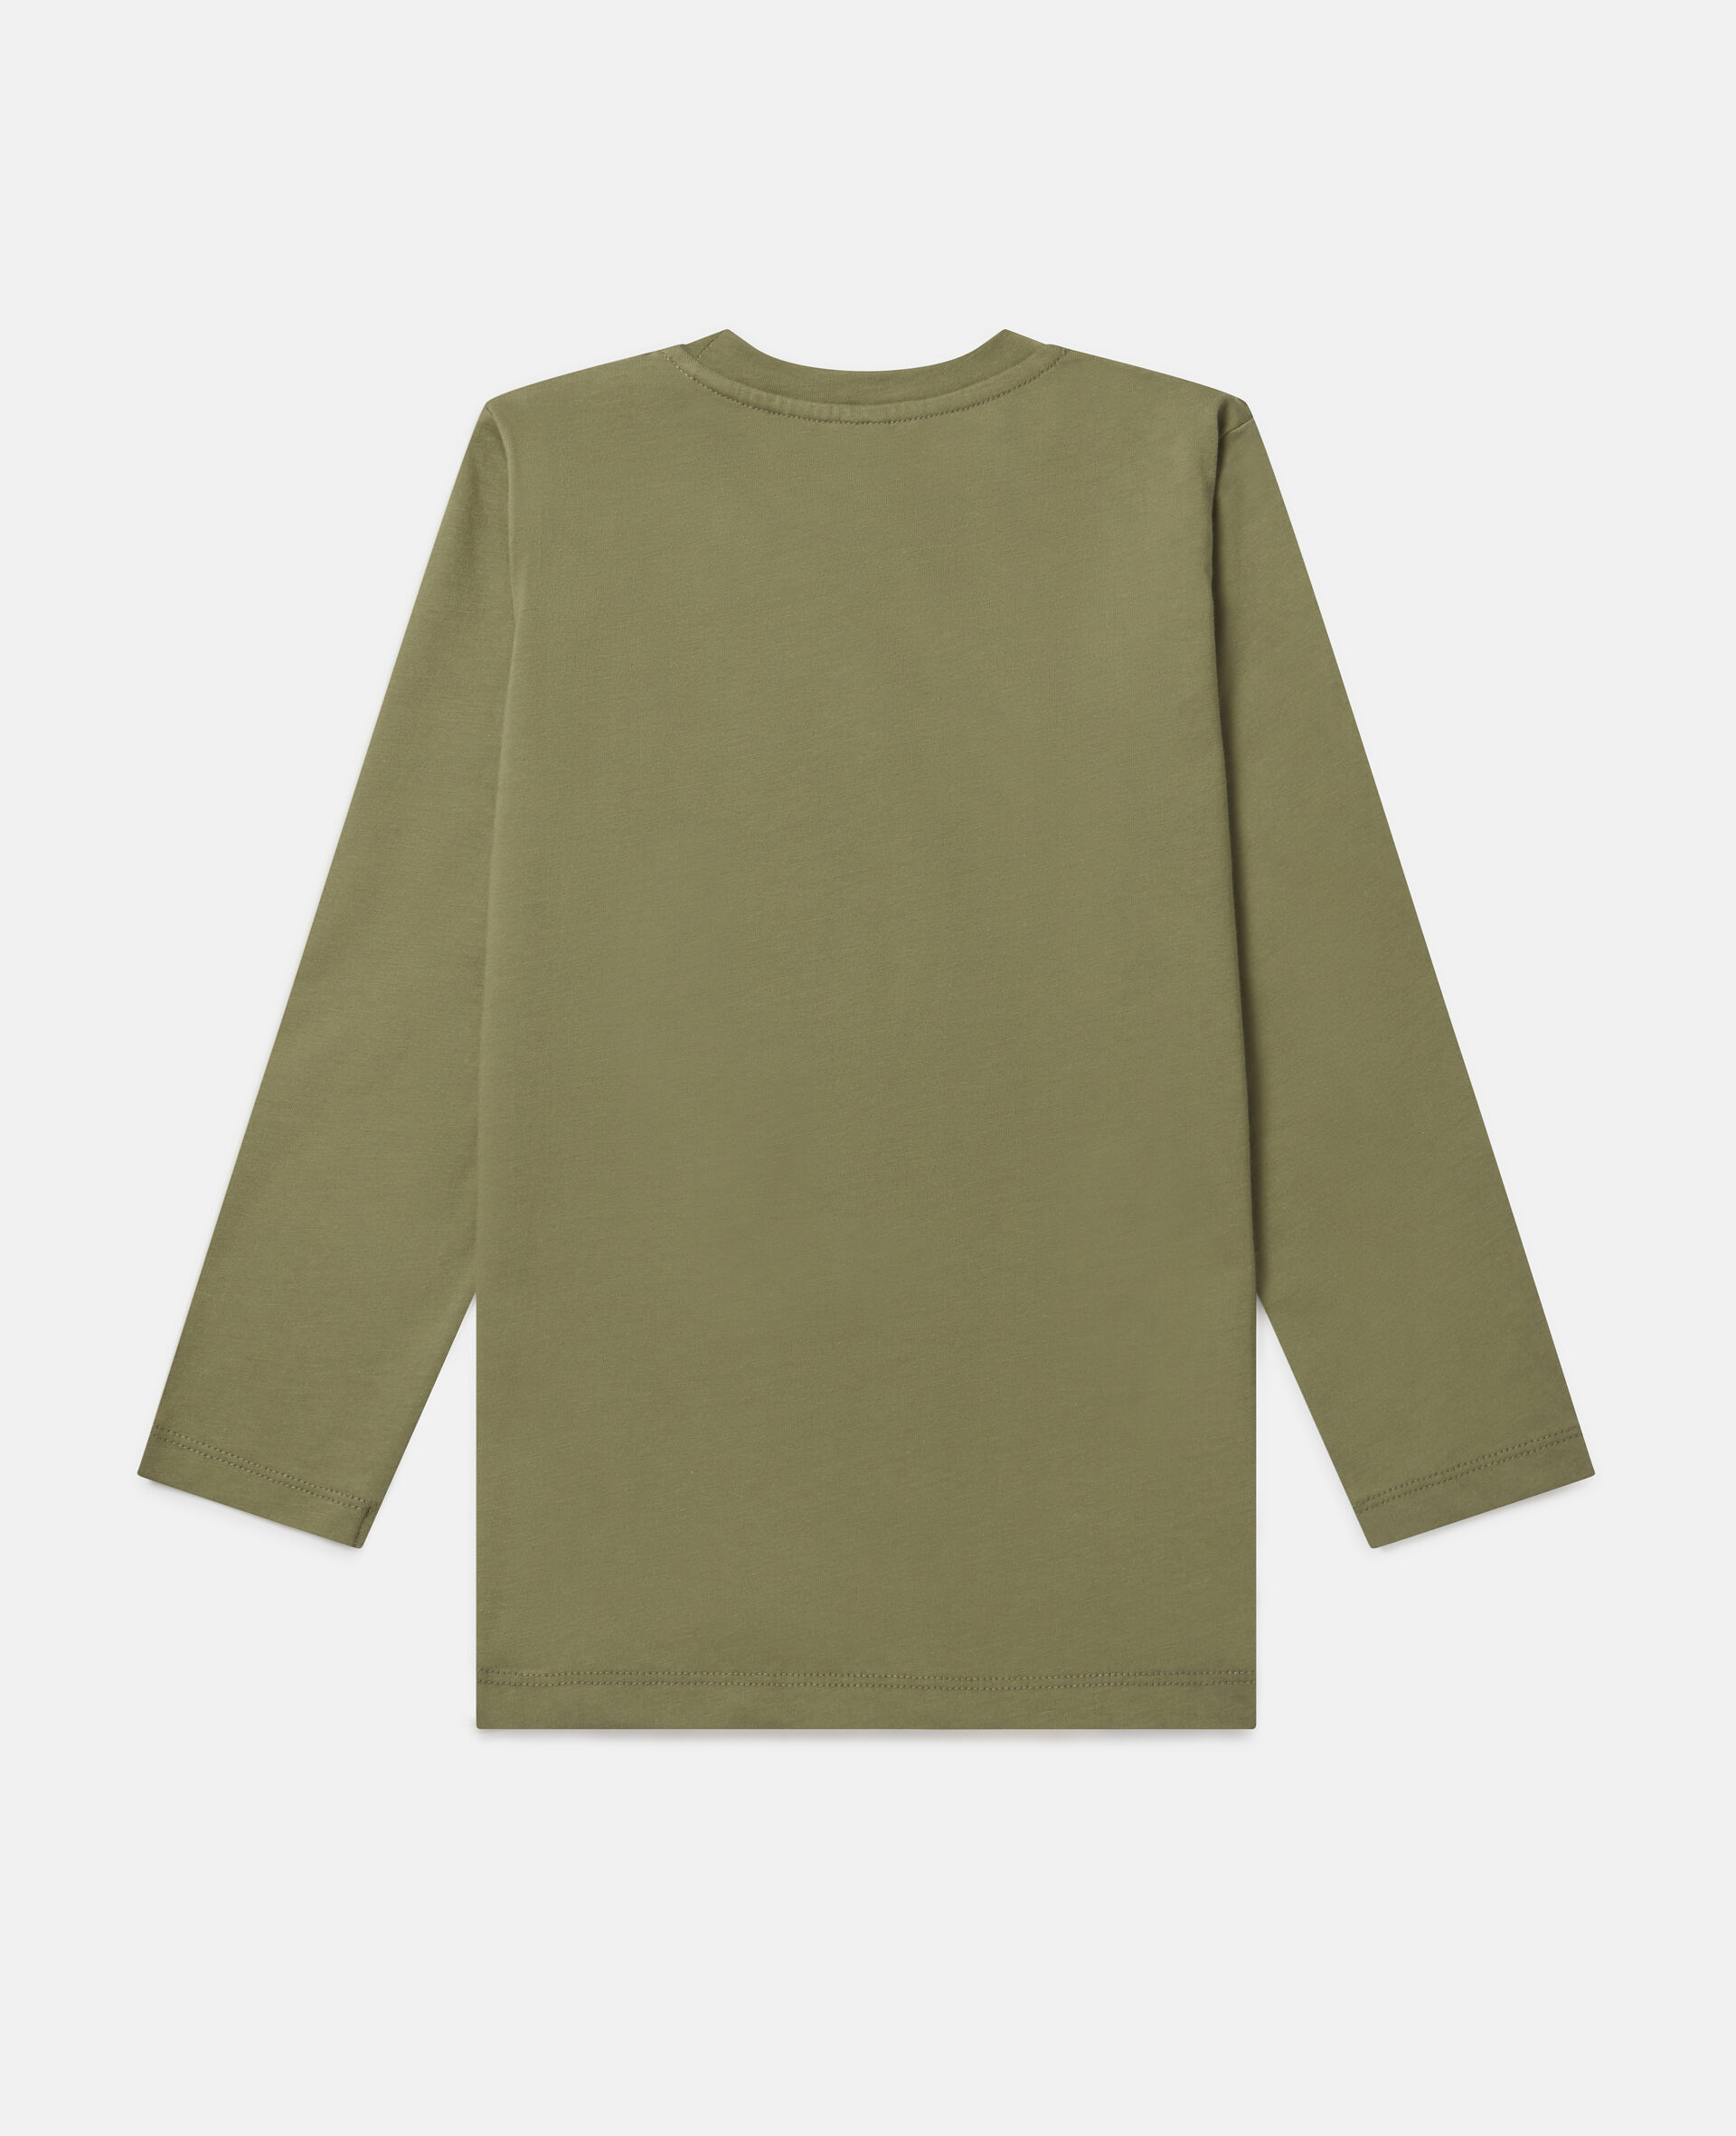 Oversized 'Stay Wild' Top-Green-large image number 3